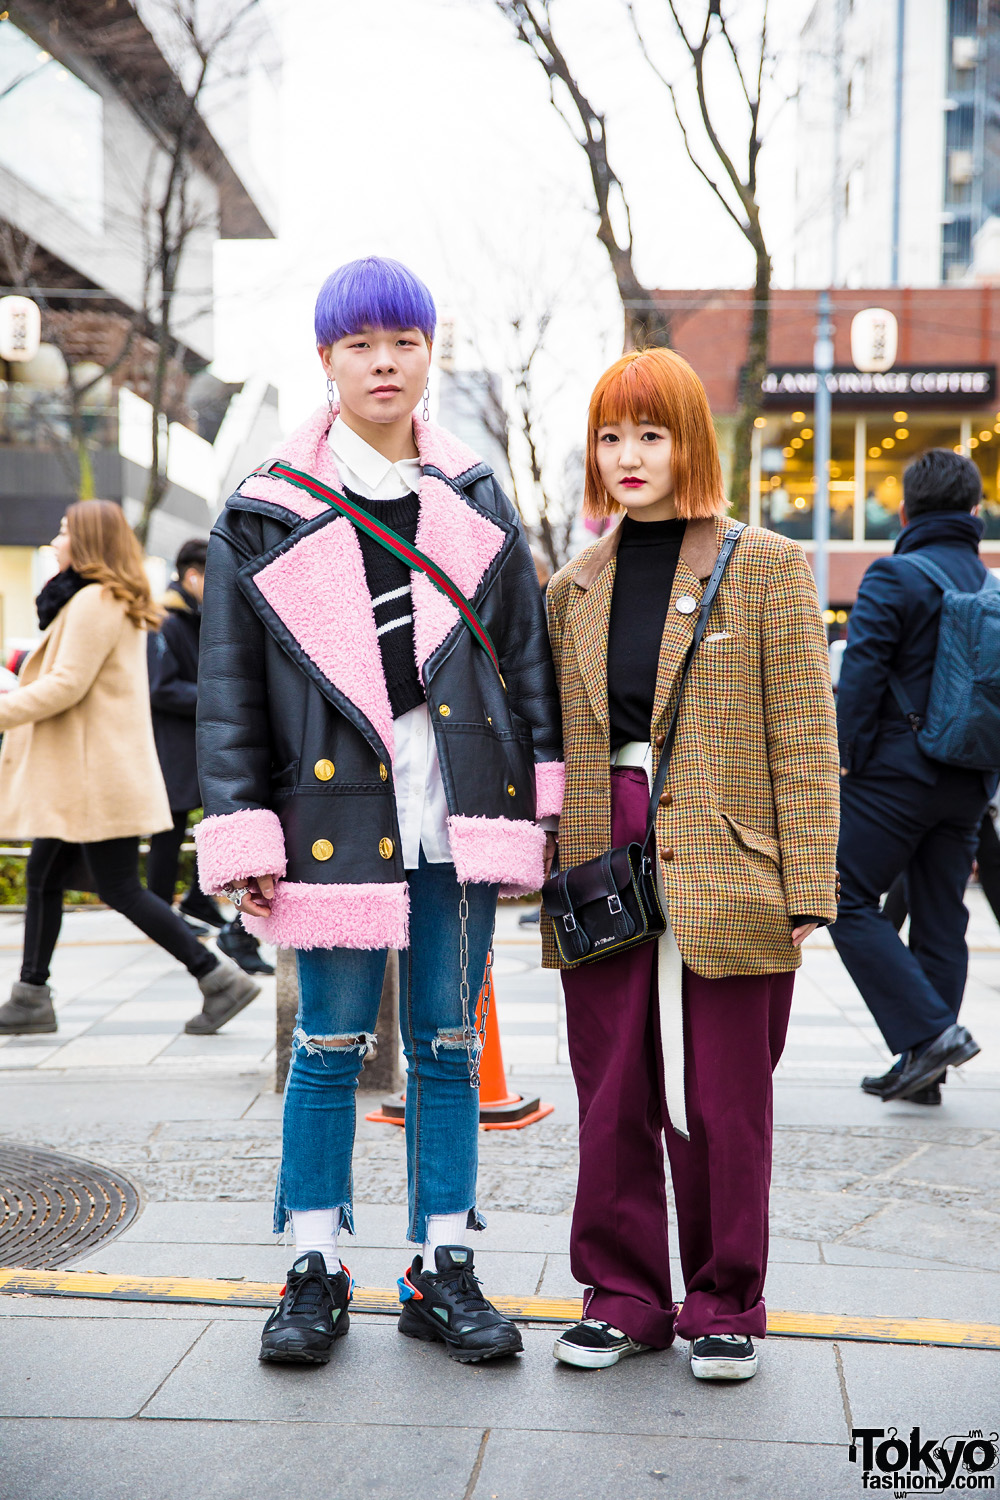 Harajuku Duo w/ Colorful Hair and Eye-Catching Street Styles